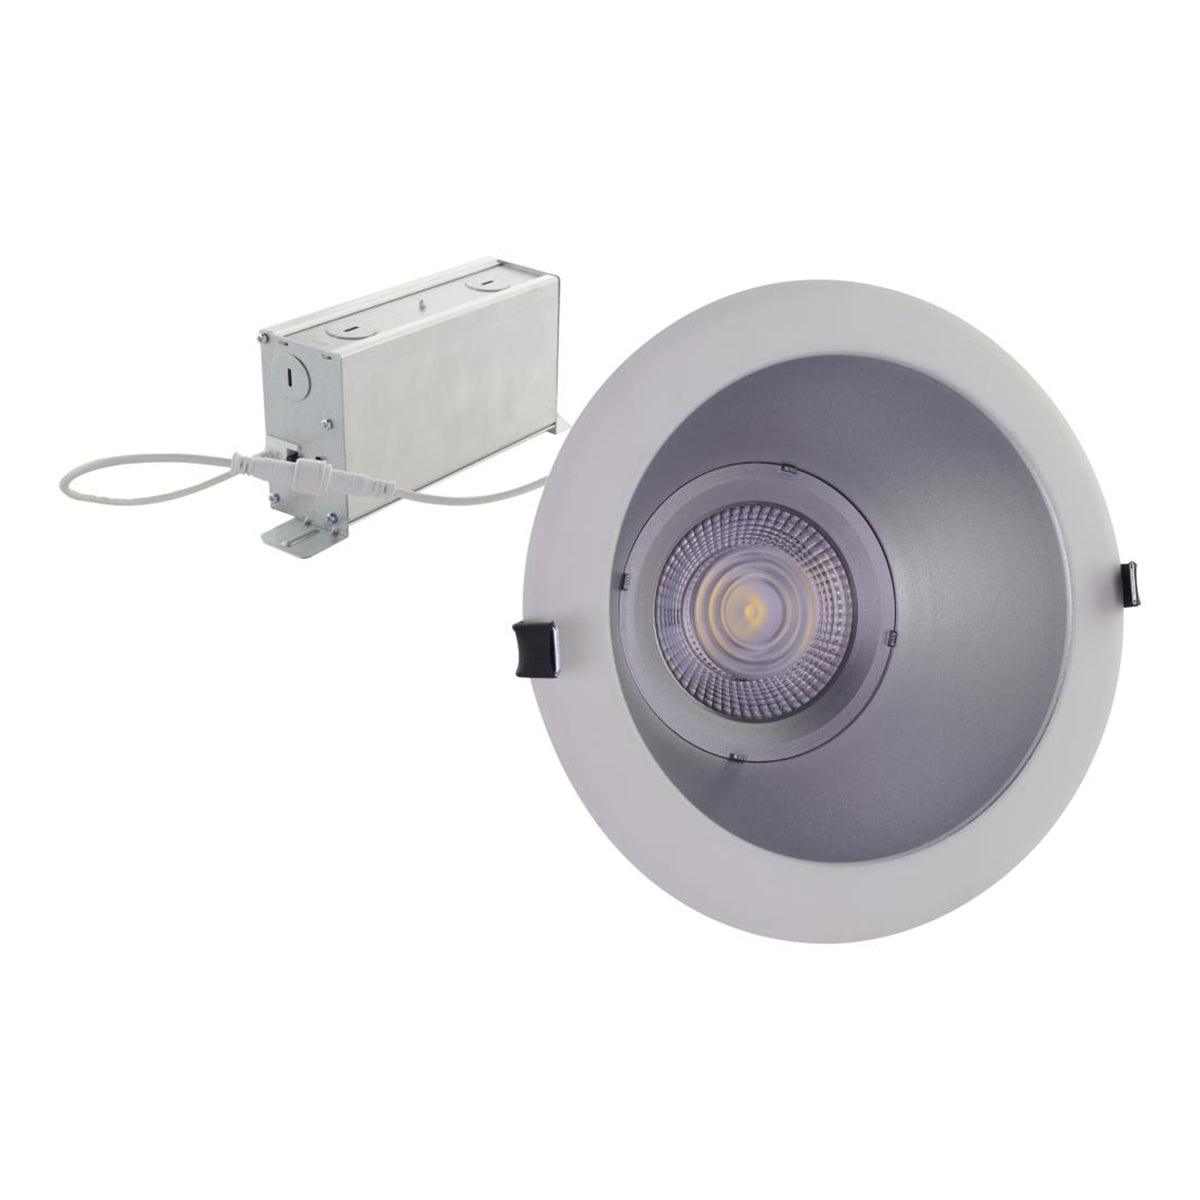 10 In. Commercial Canless LED Recessed Light, 46 Watt, 3500 Lumens, Selectable CCT, 2700K to 5000K, Silver Finish - Bees Lighting